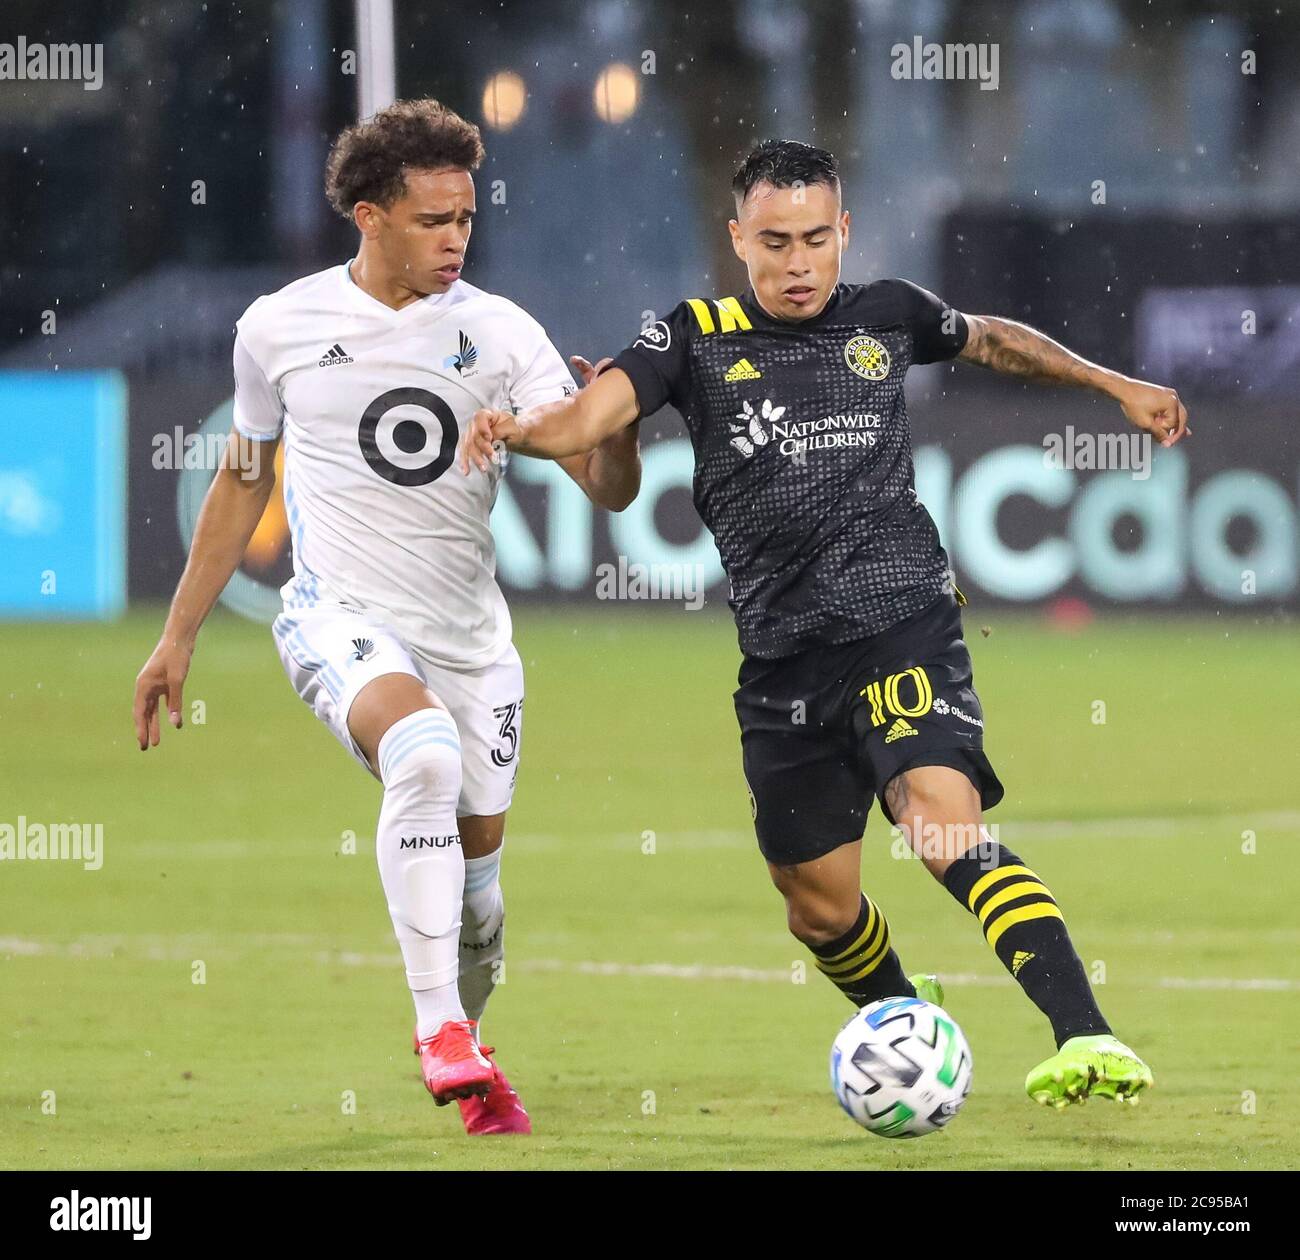 Orlando, Florida, USA. July 28, 2020: Columbus Crew midfielder LUCAS ZELARRAYAN (10) competes for the ball against Minnesota United midfielder HASSANI DOTSON (31) during the MLS is Back Tournament Columbus Crew SC vs Minnesota United FC match at ESPN Wide World of Sports Complex in Orlando, Fl on July 28, 2020. Credit: Cory Knowlton/ZUMA Wire/Alamy Live News Stock Photo